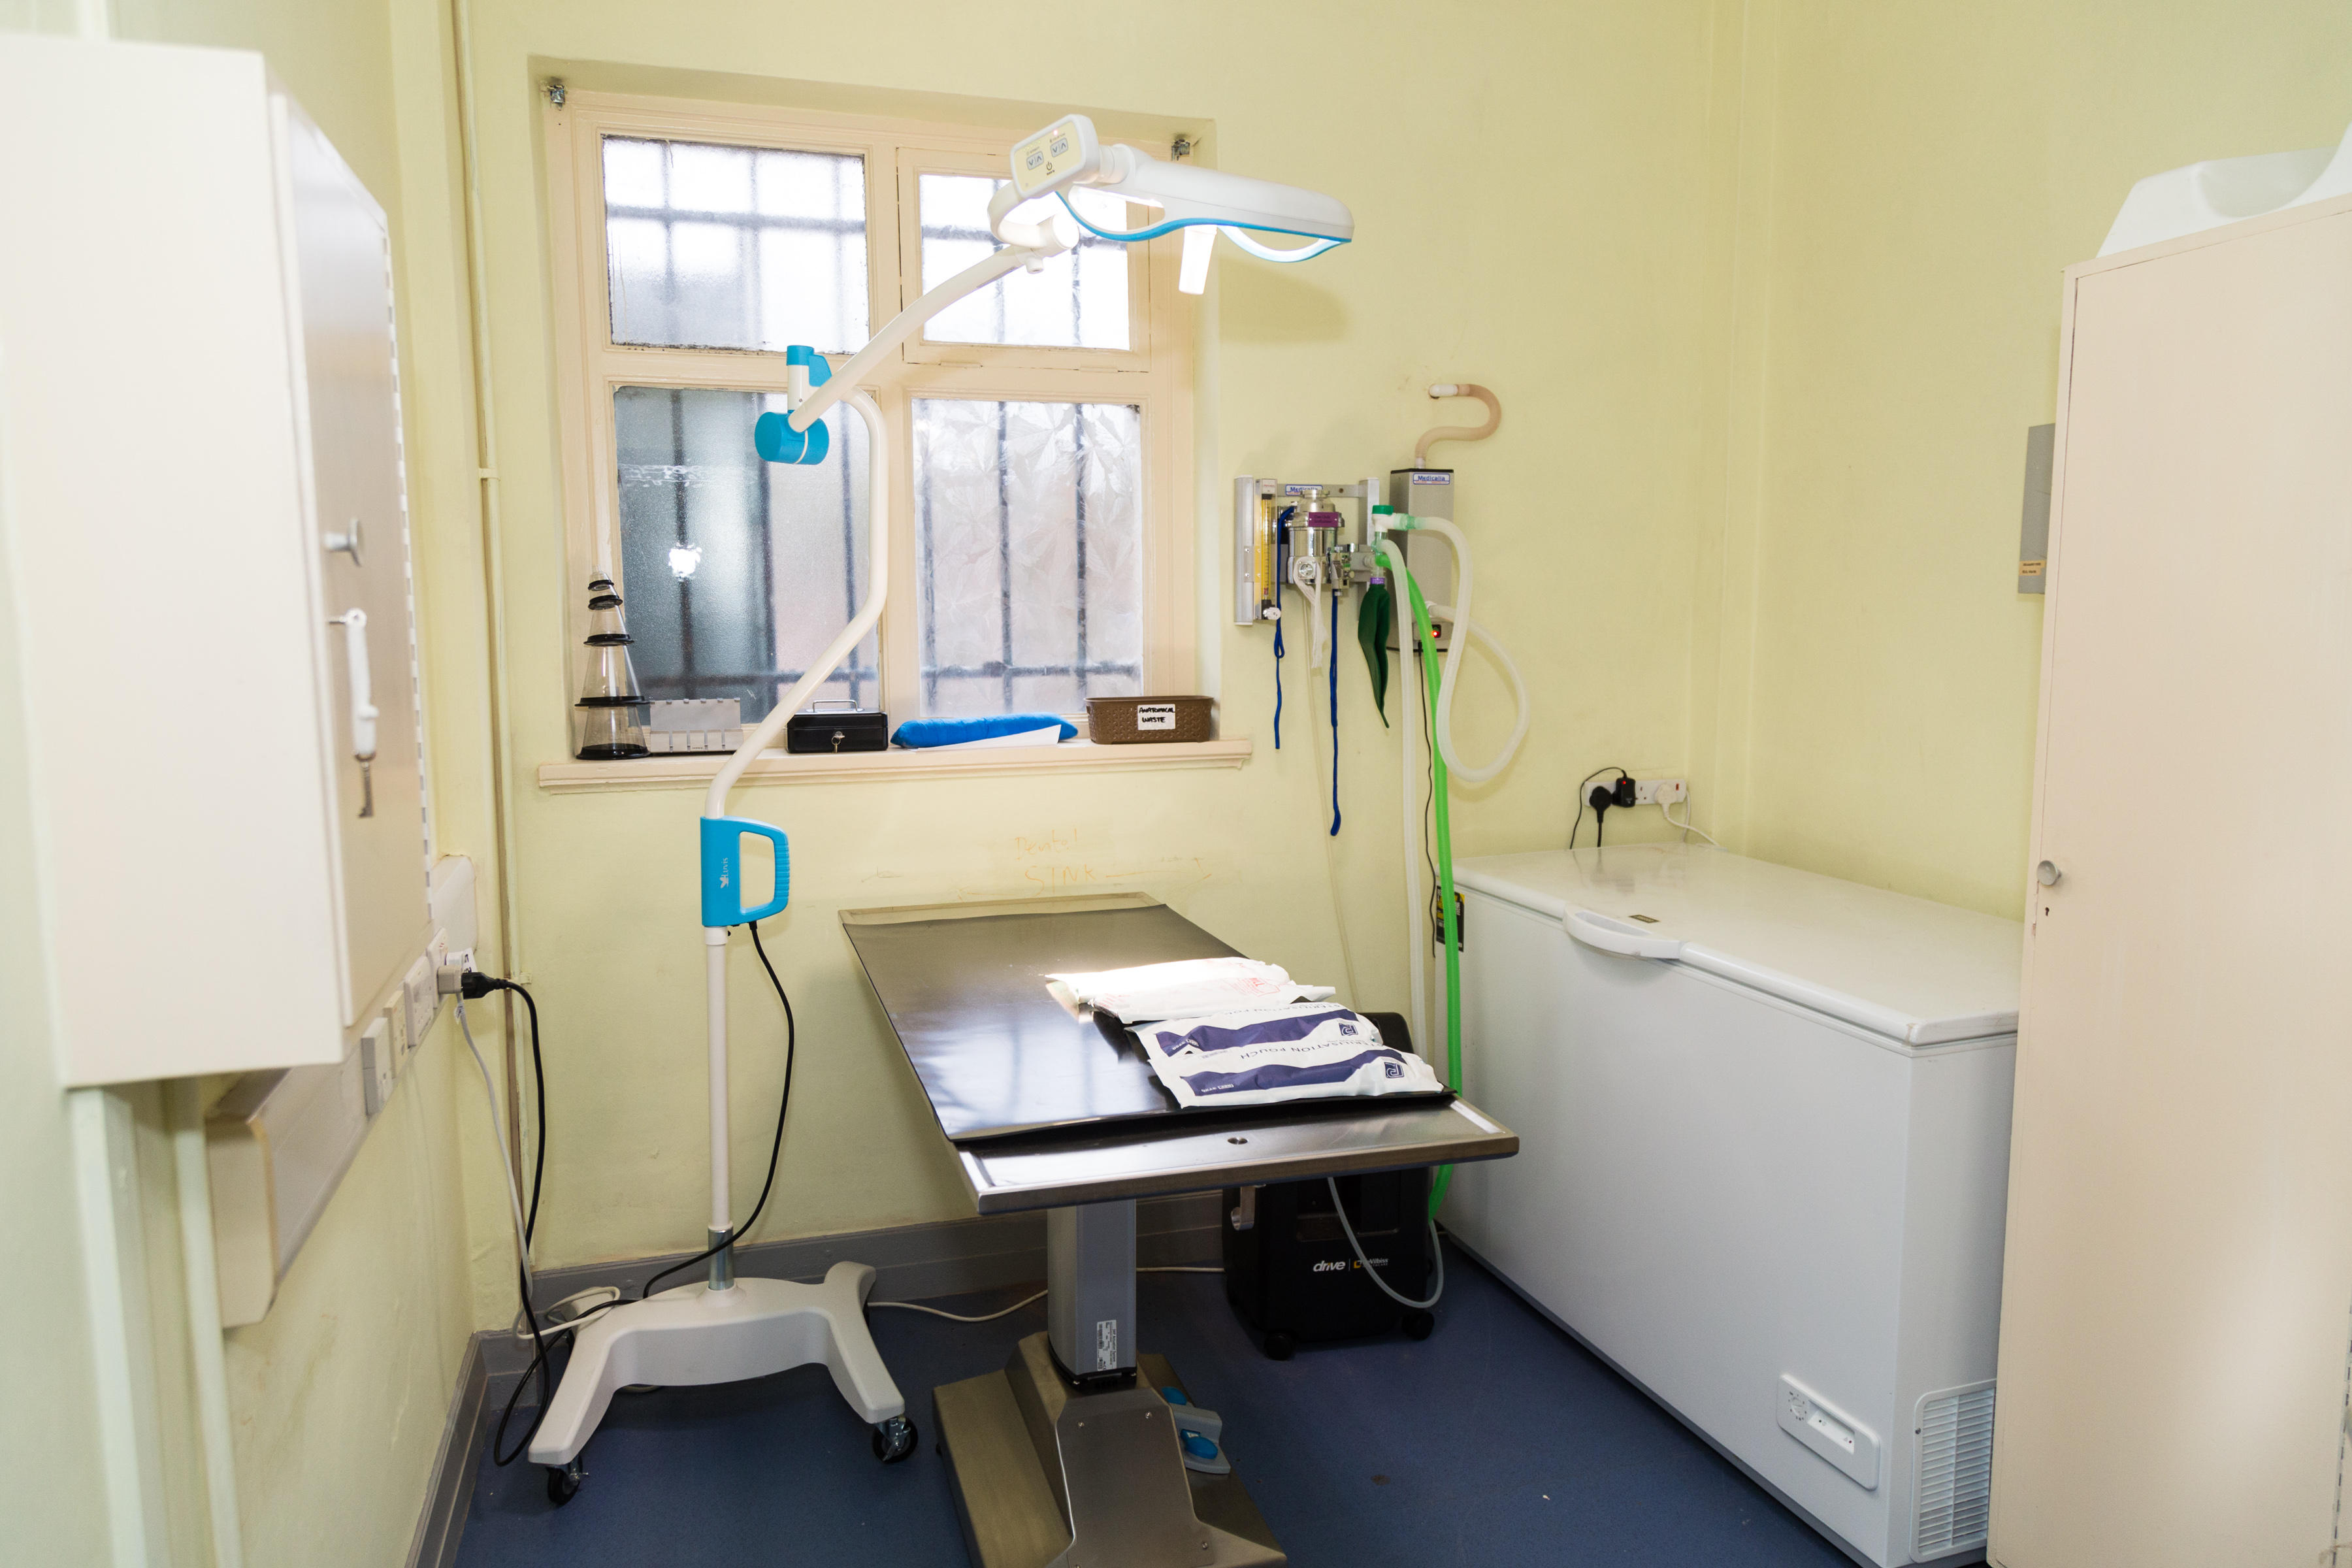 Images Tameside Veterinary Clinic, Hyde